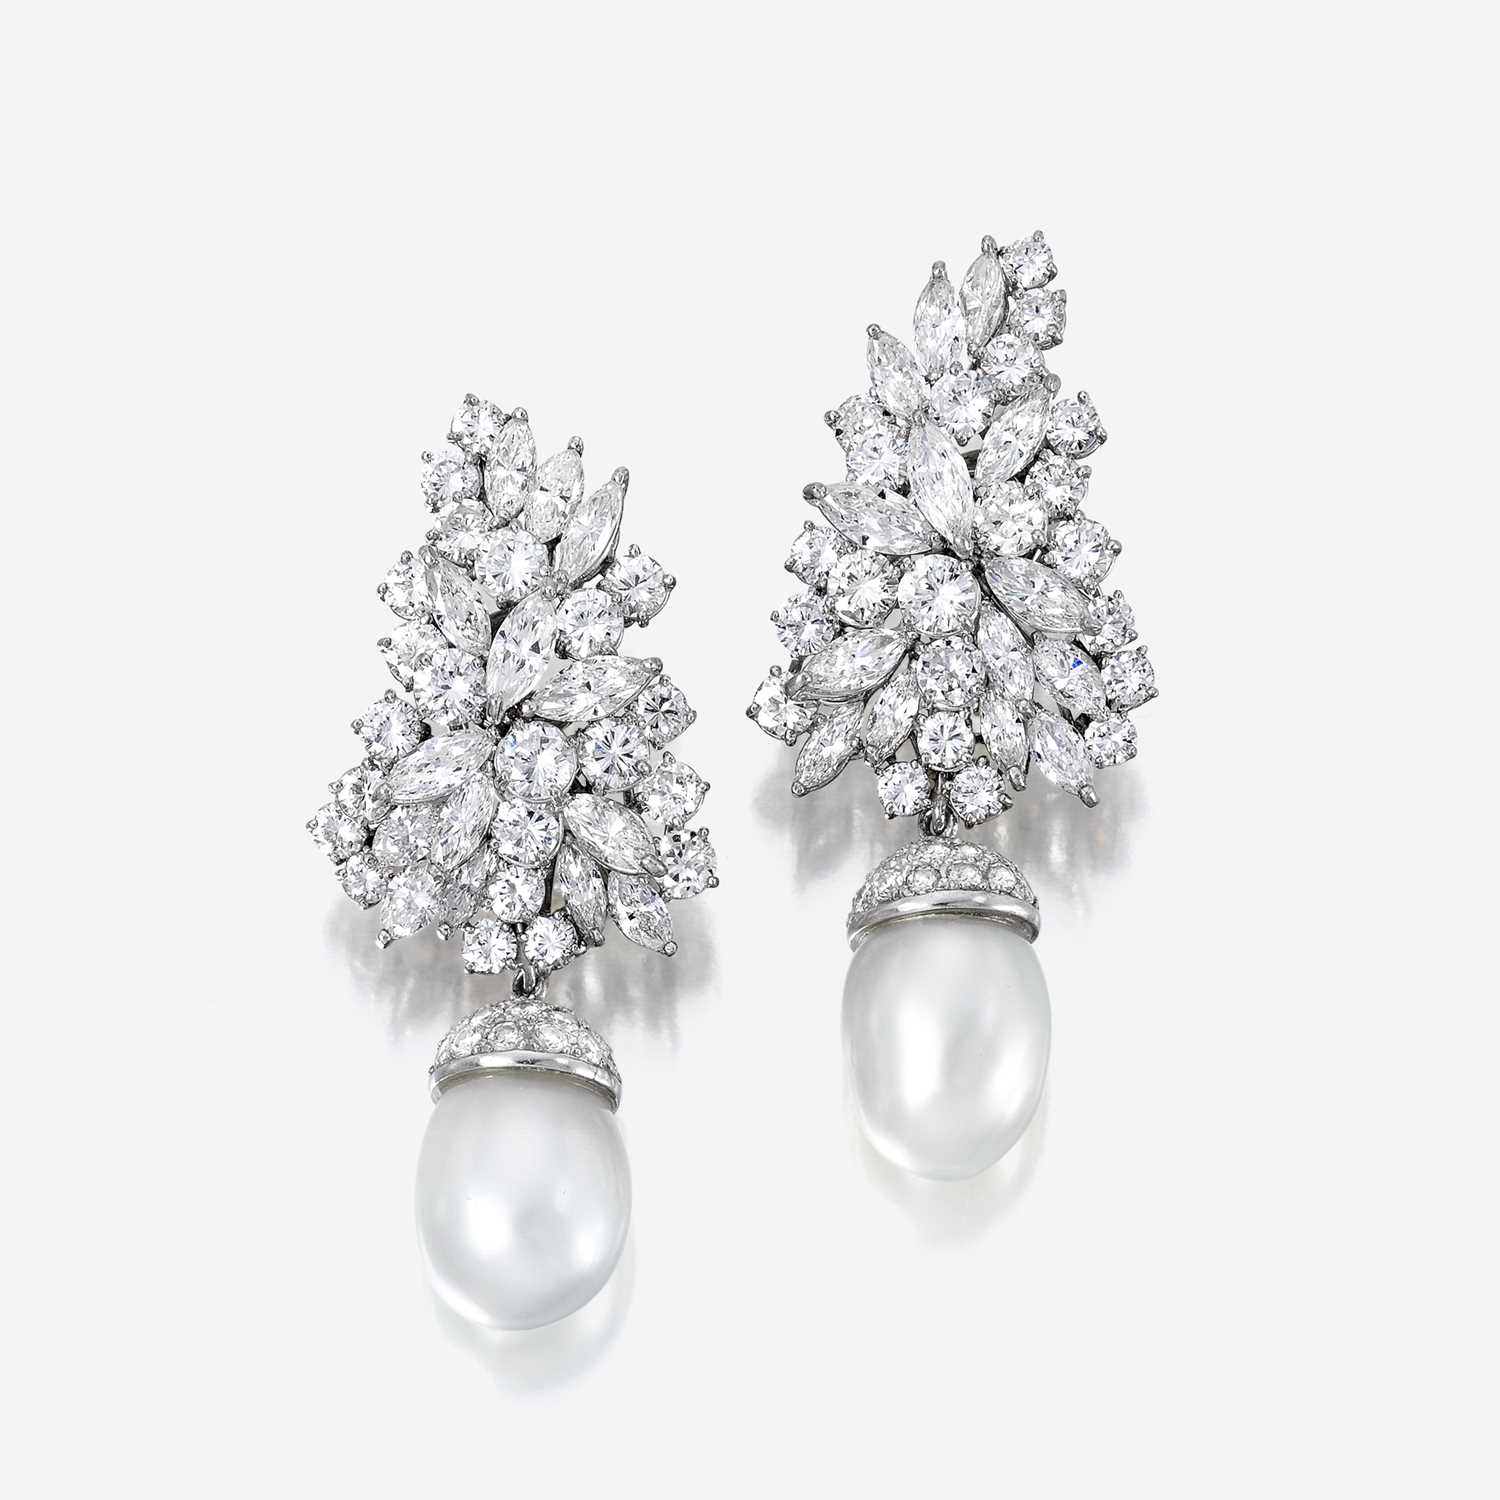 Lot 83 - A pair of diamond, South Sea cultured pearl, and platinum earrings